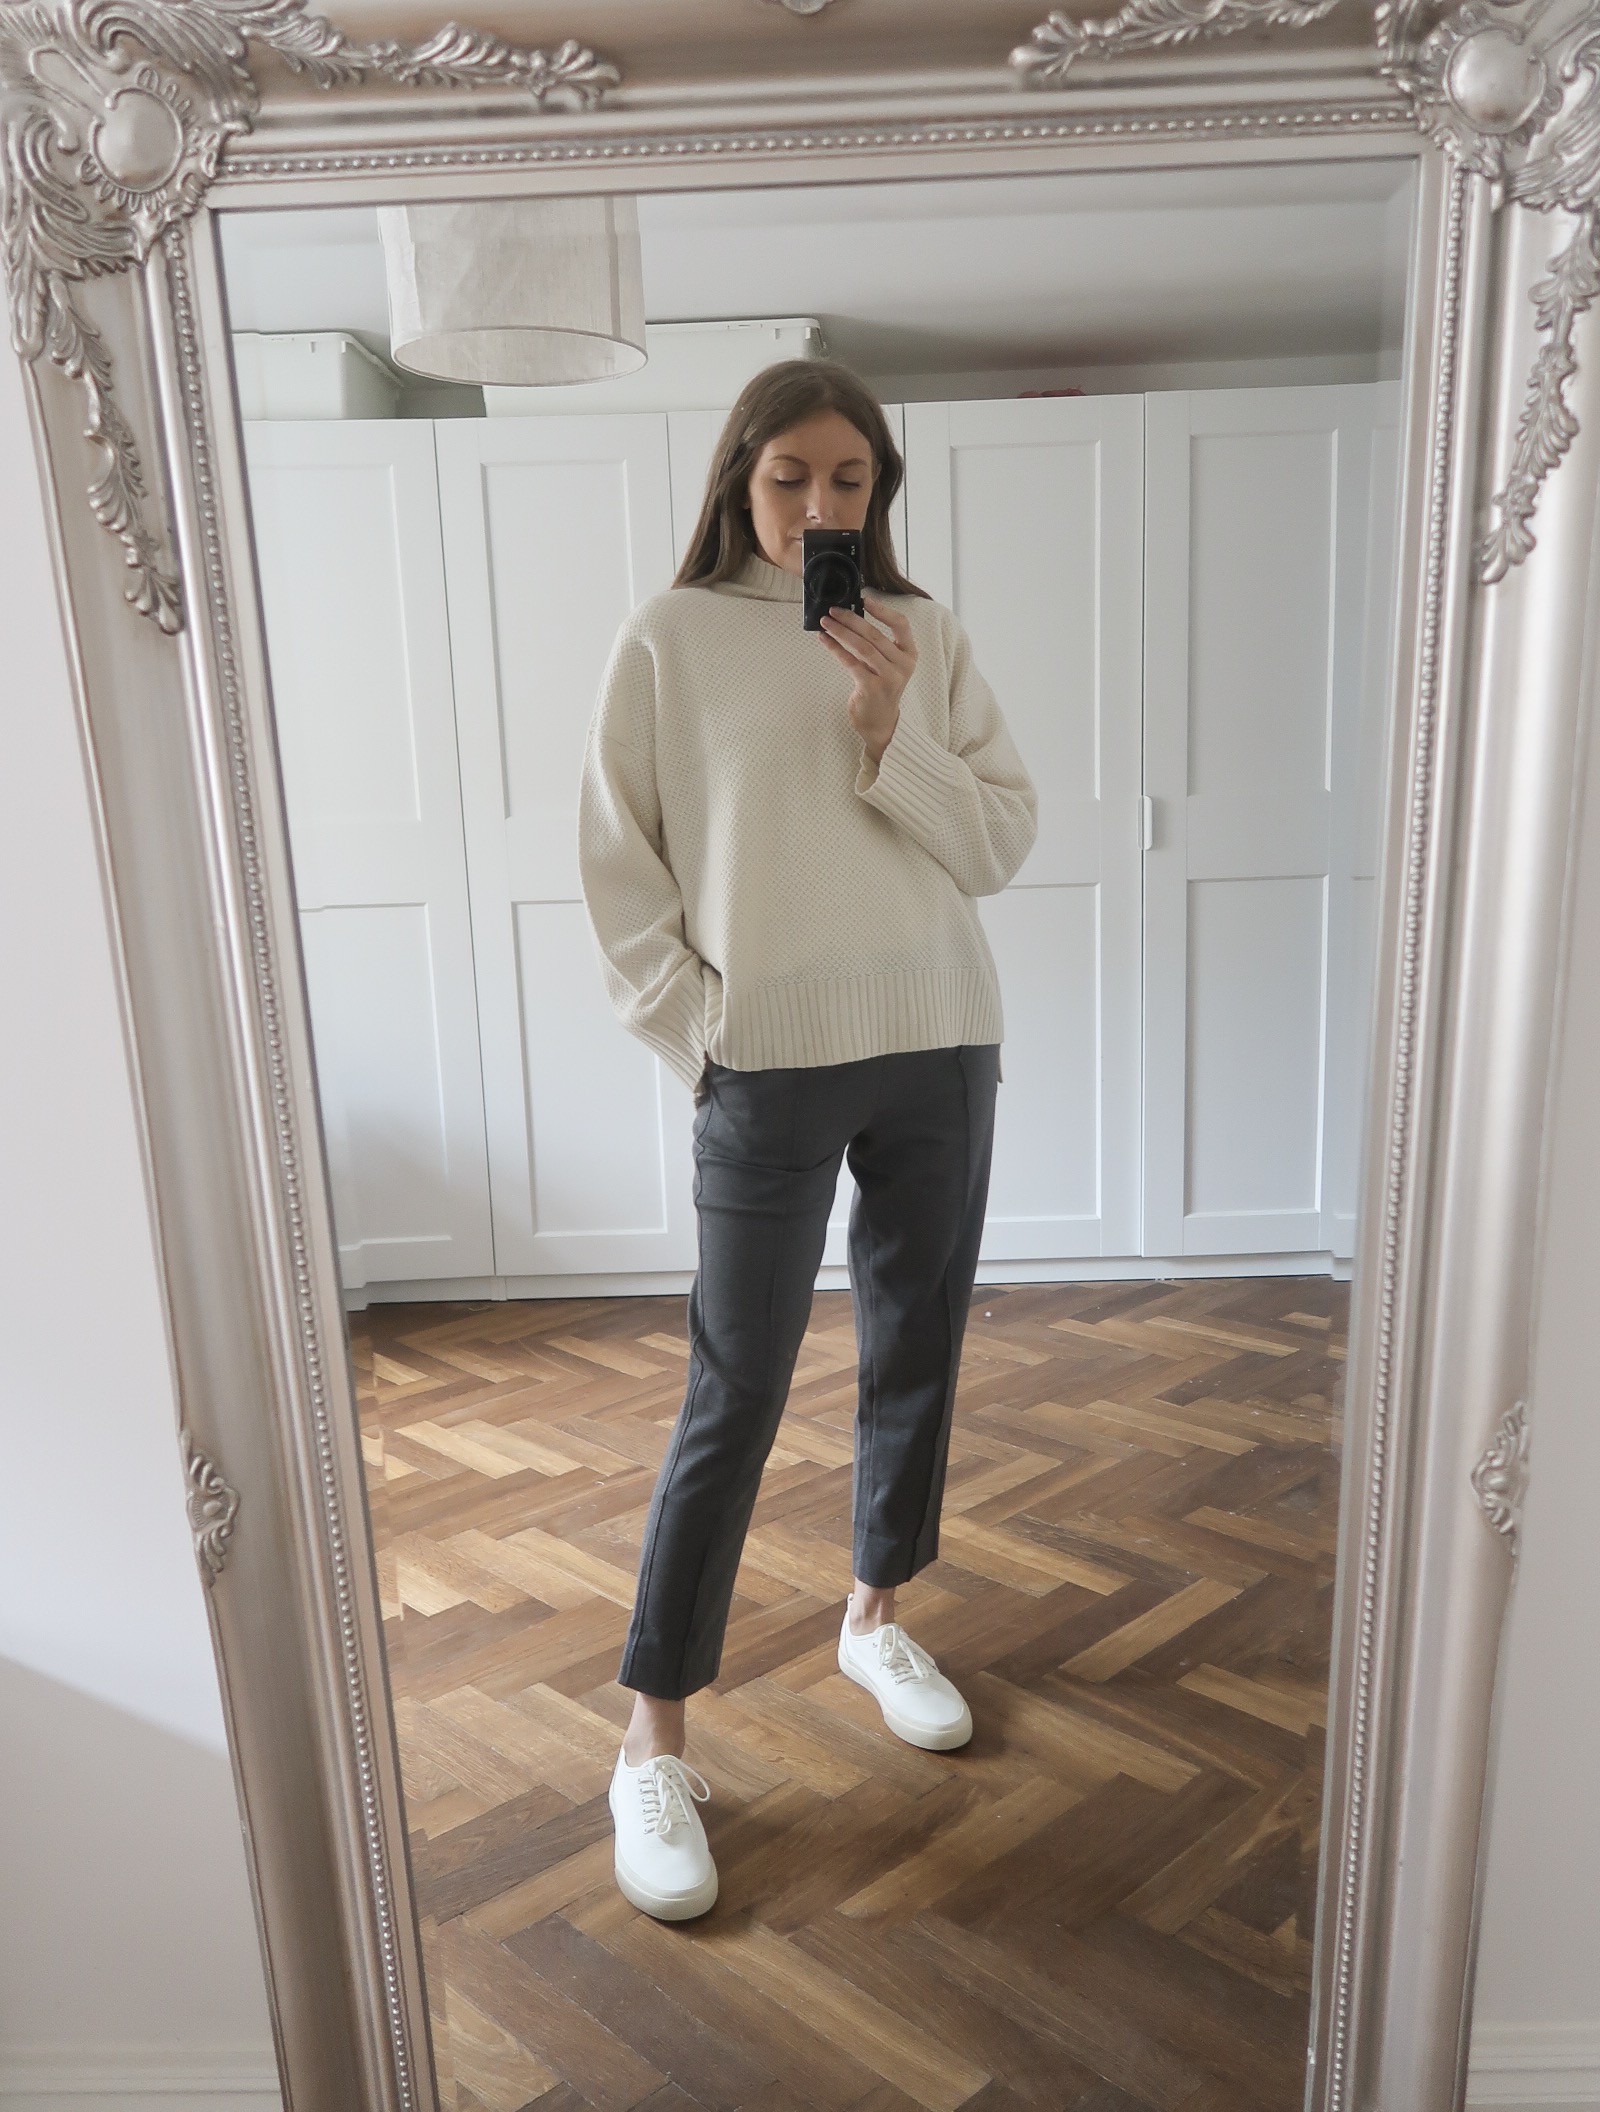 https://usercontent.one/wp/www.lovestylemindfulness.co.uk/wp-content/uploads/2020/11/Everlane-Autumn-Outfit-Idea.jpg